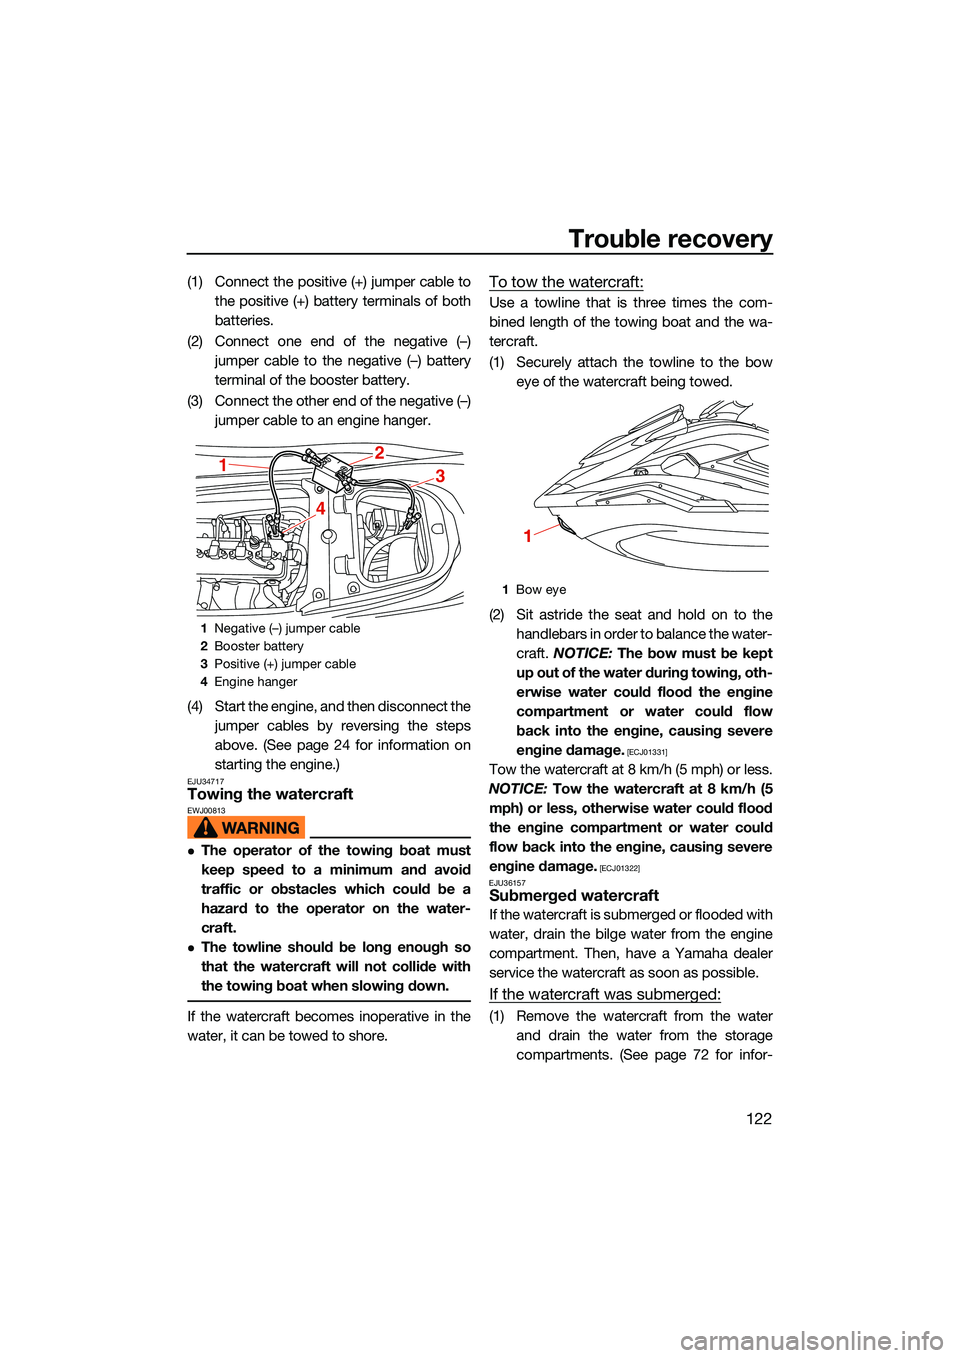 YAMAHA FX HO CRUISER 2022  Owners Manual Trouble recovery
122
(1) Connect the positive (+) jumper cable tothe positive (+) battery terminals of both
batteries.
(2) Connect one end of the negative (–) jumper cable to the negative (–) batt